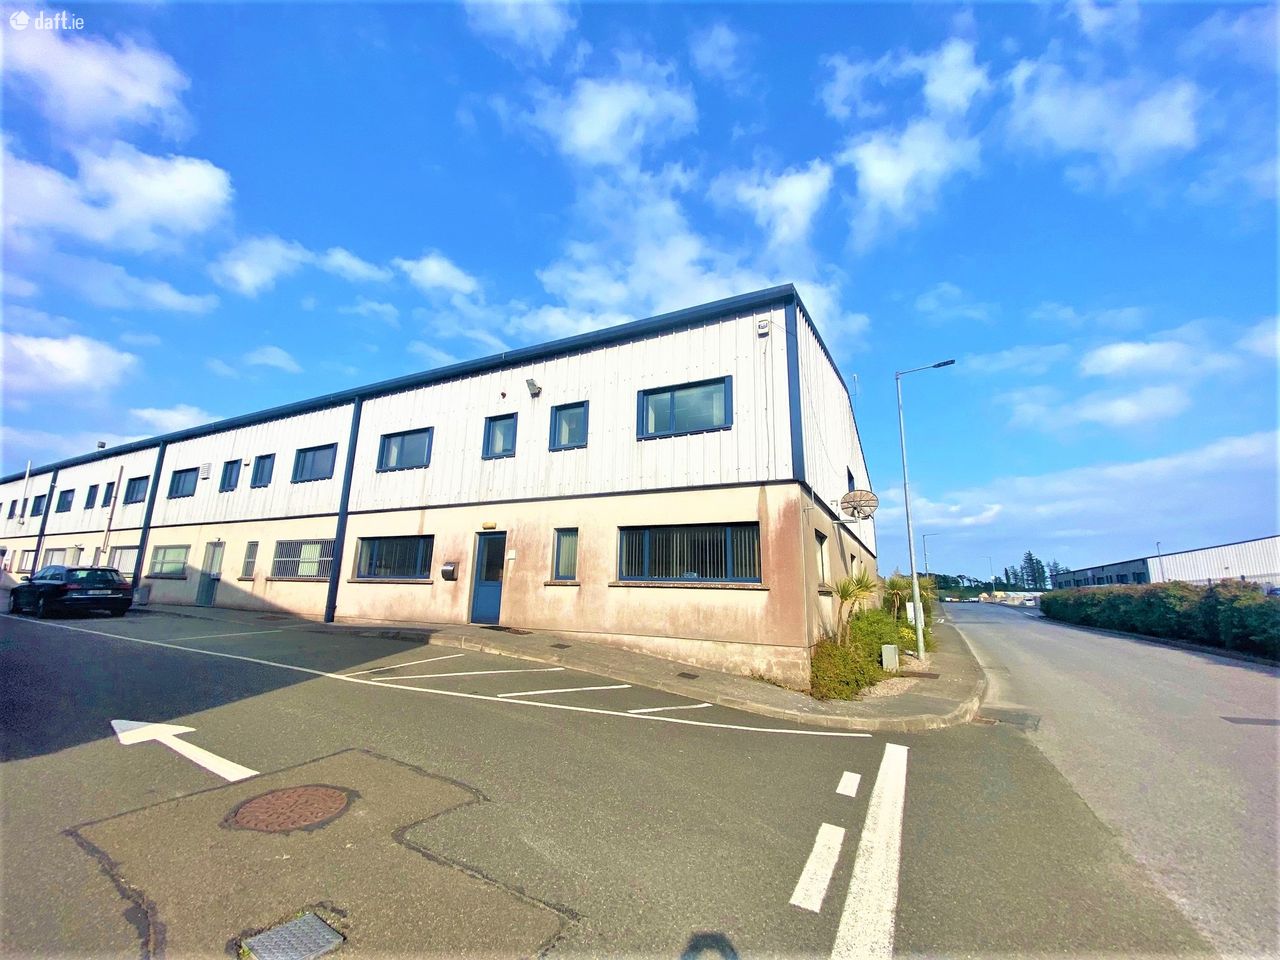 India Unit 1, Cessna Avenue, Waterford Airport Business Park, Killowen, Waterford City, Co. Waterford